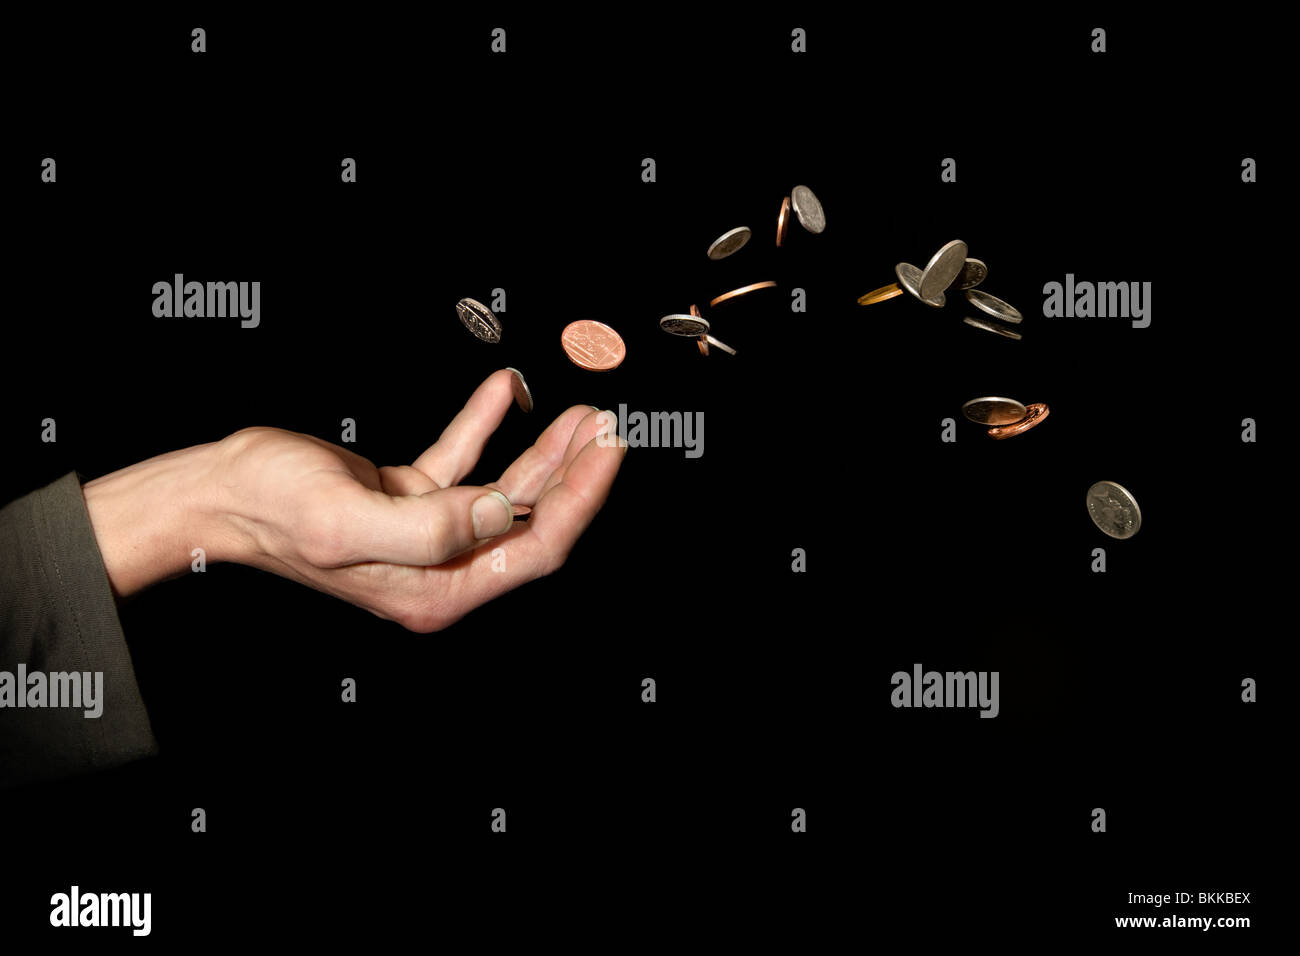 Caucasian male (42 yrs old) hand with money in the air depicting the concept of ‘throwing money away’ Stock Photo